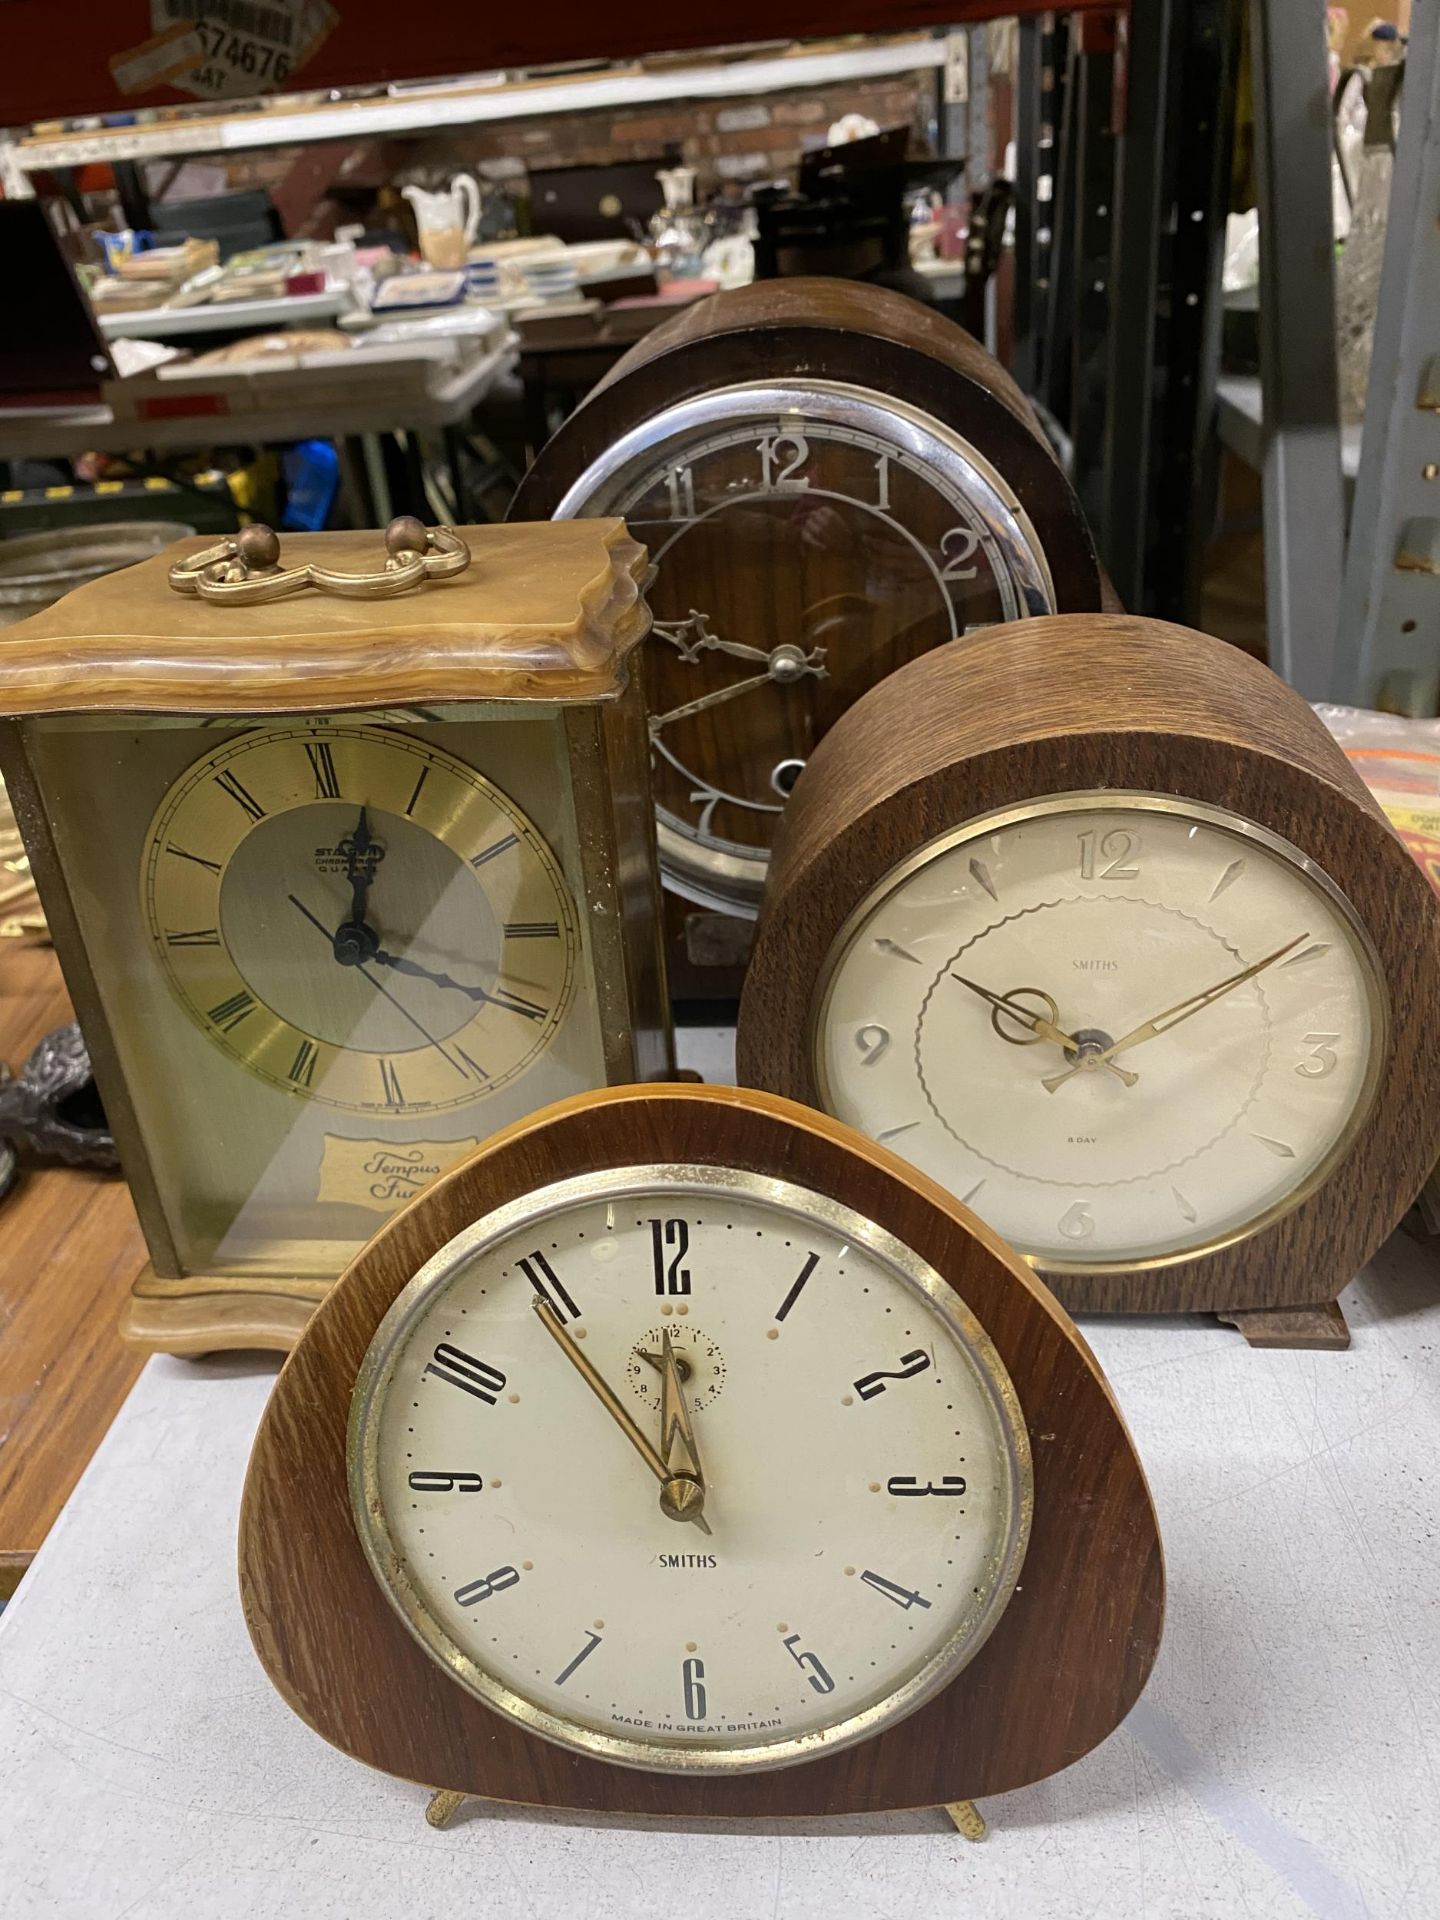 AQUANTITY OF VINTAGE MANTLE CLOCKS TO INCLUDE SMITH'S, ETC - 6 IN TOTAL - Image 2 of 2